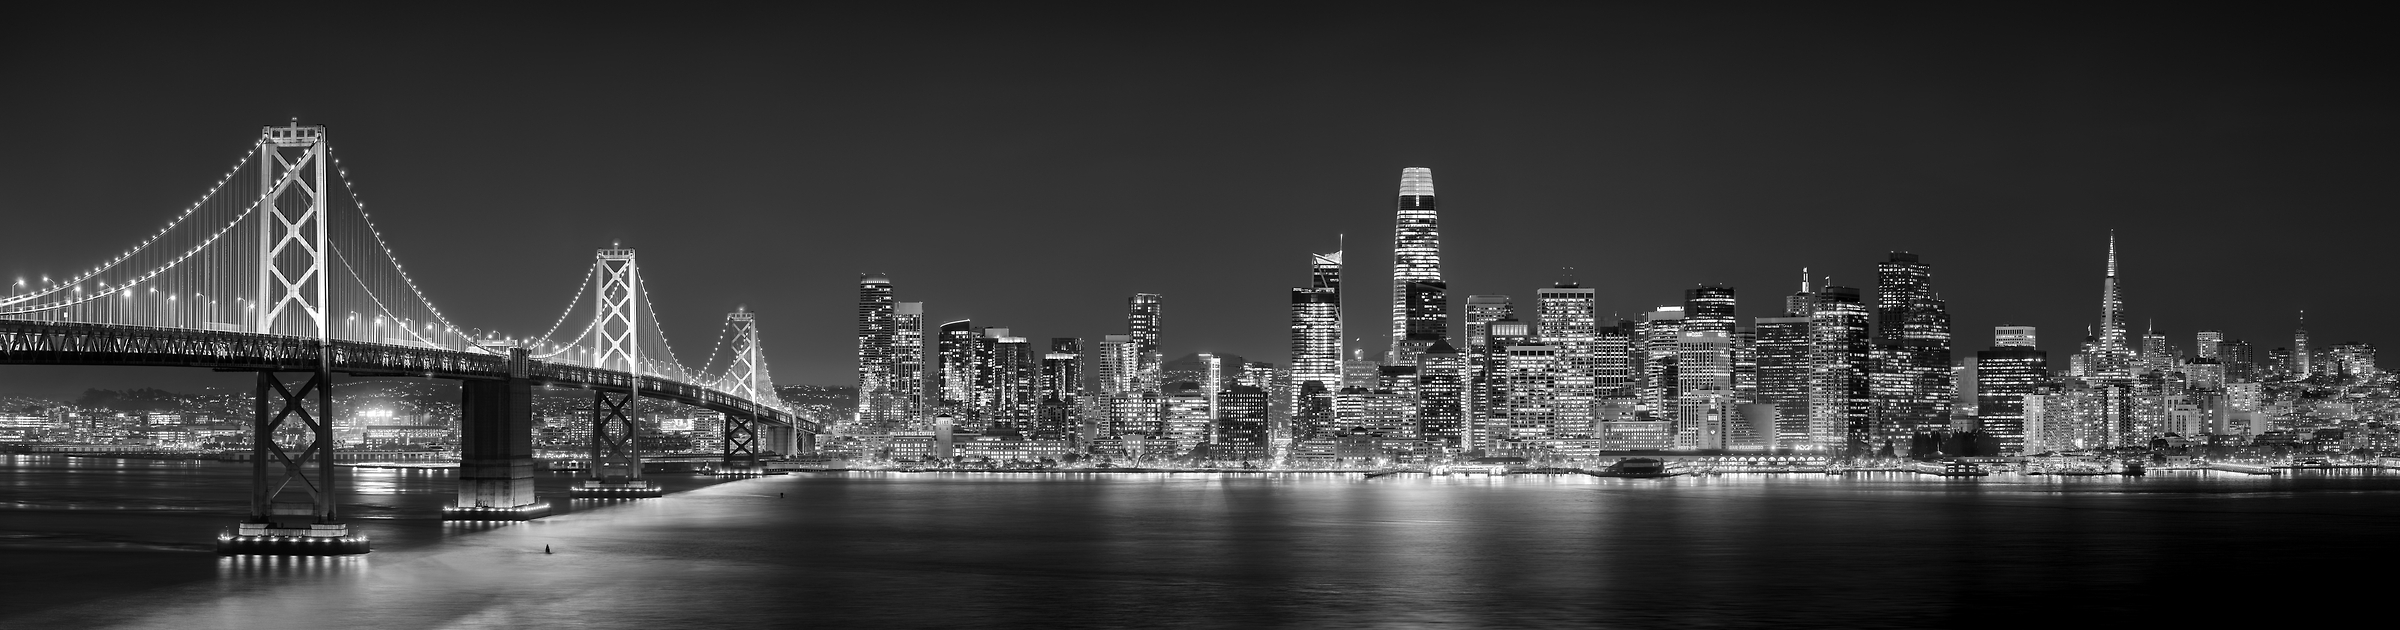 686 megapixels! A very high resolution, large-format VAST photo print of the San Francisco skyline and the Bay Bridge at night; fine art cityscape skyline photograph created by Jim Tarpo in Yerba Buena Island and Treasure Island, San Francisco, California.